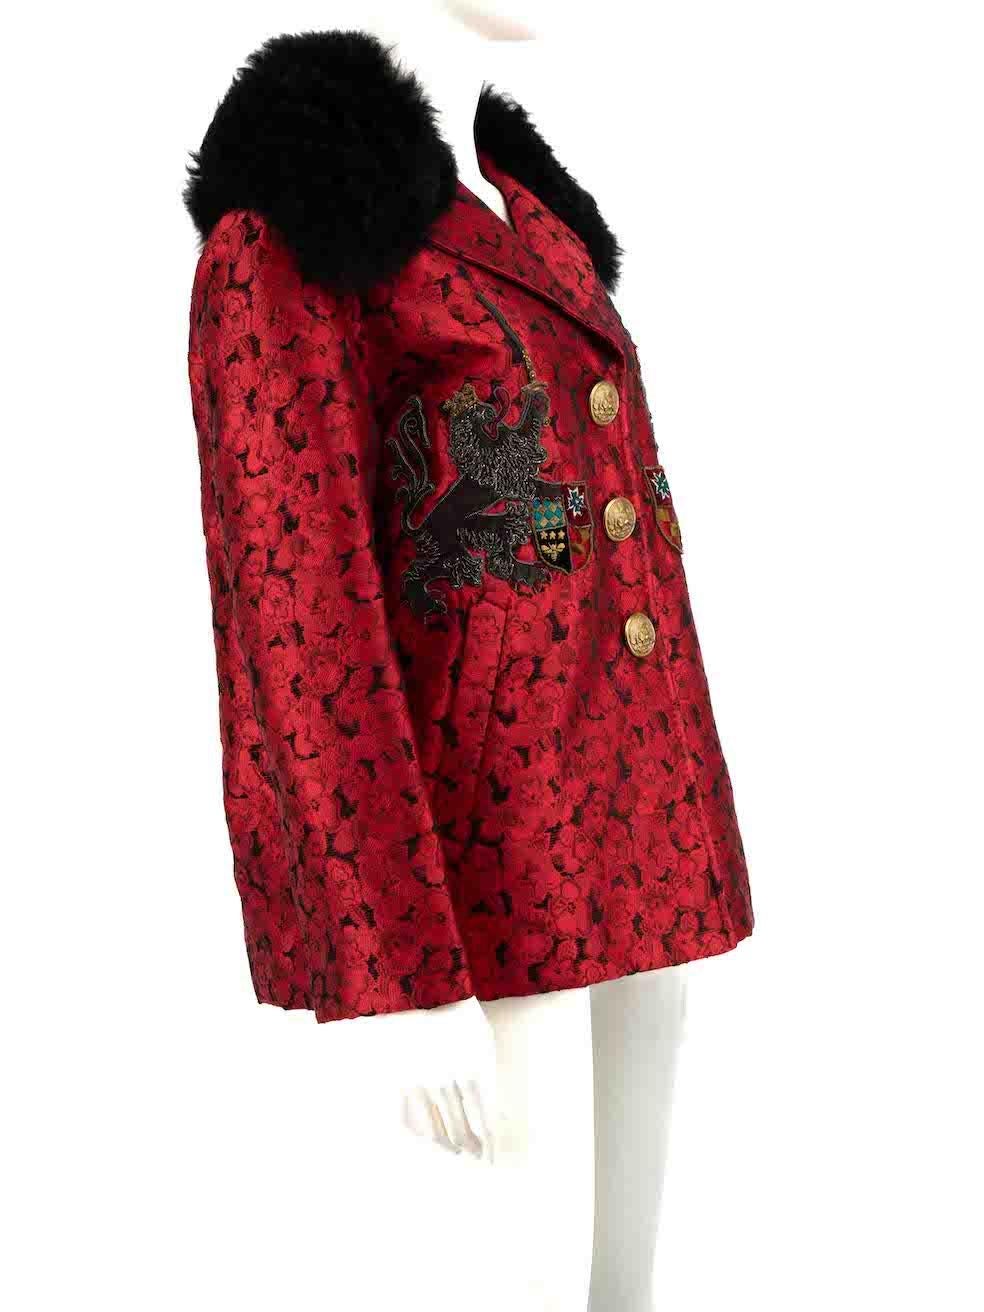 CONDITION is Very good. Hardly any visible wear to jacket is evident on this used Dolce & Gabbana designer resale item.
 
 Details
 Red
 Viscose
 Oversized jacket
 Mid length
 Floral jacquard pattern
 Embroidery detail
 Buttoned detachable fur